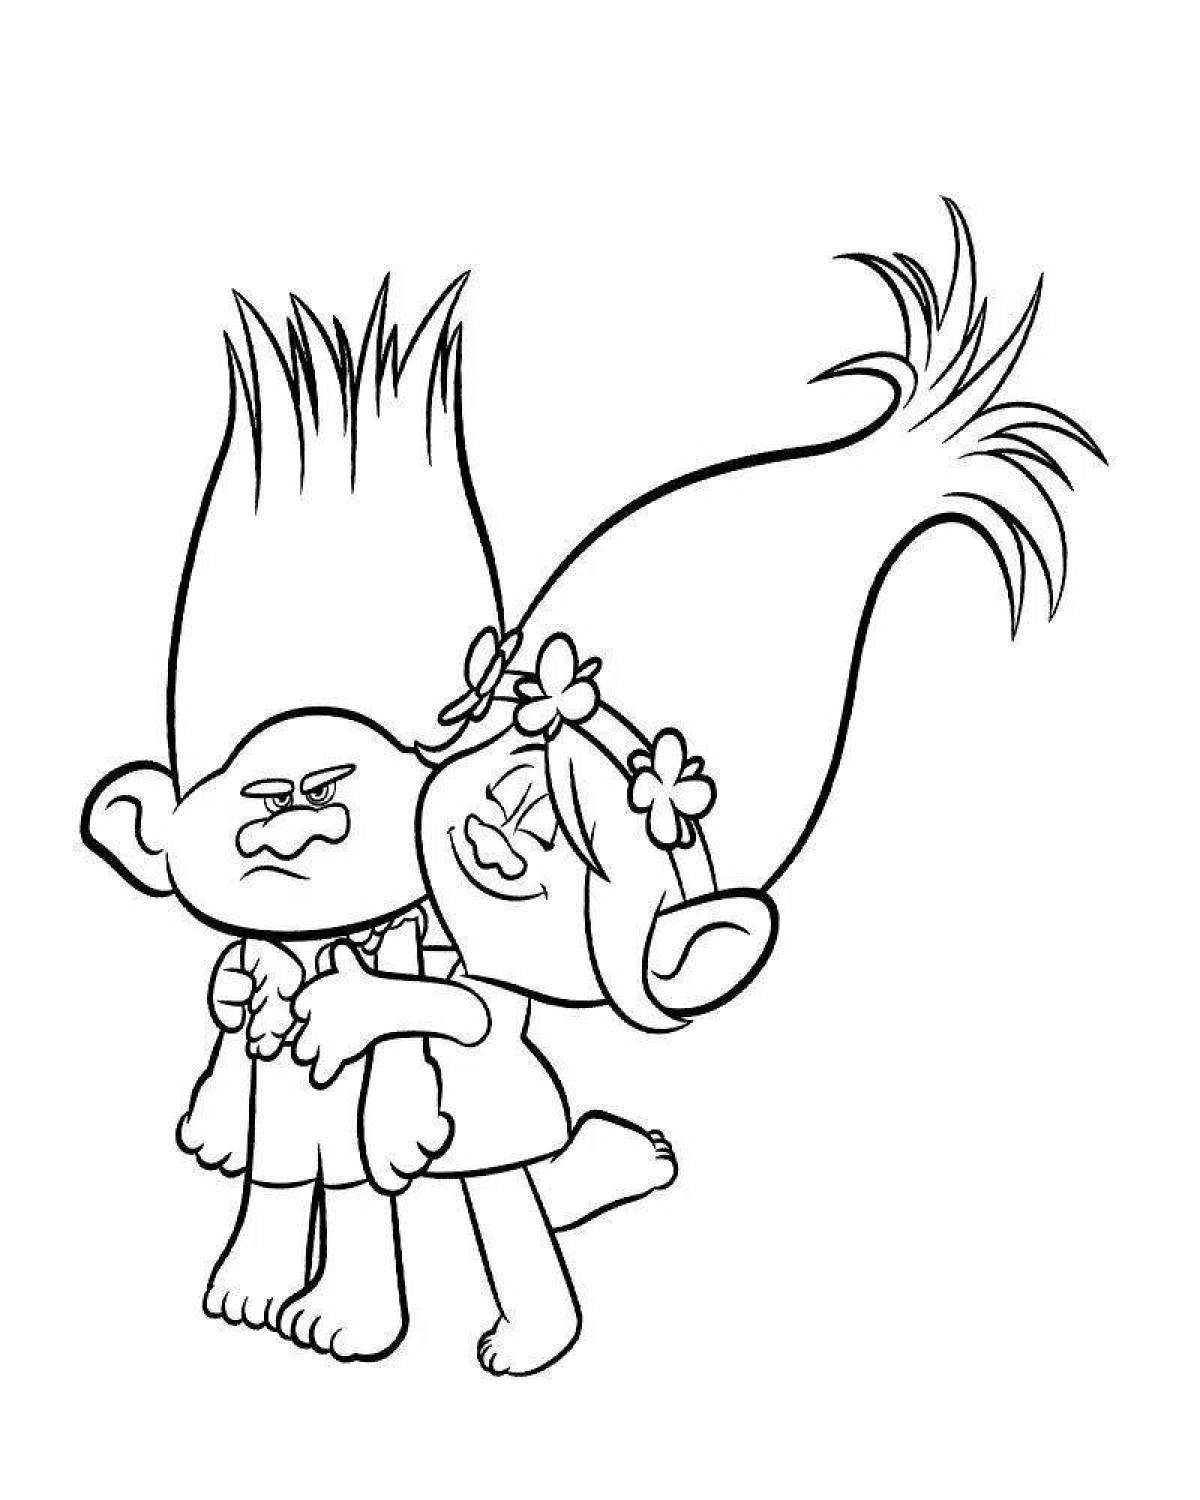 Exquisite coloring book for troll girls